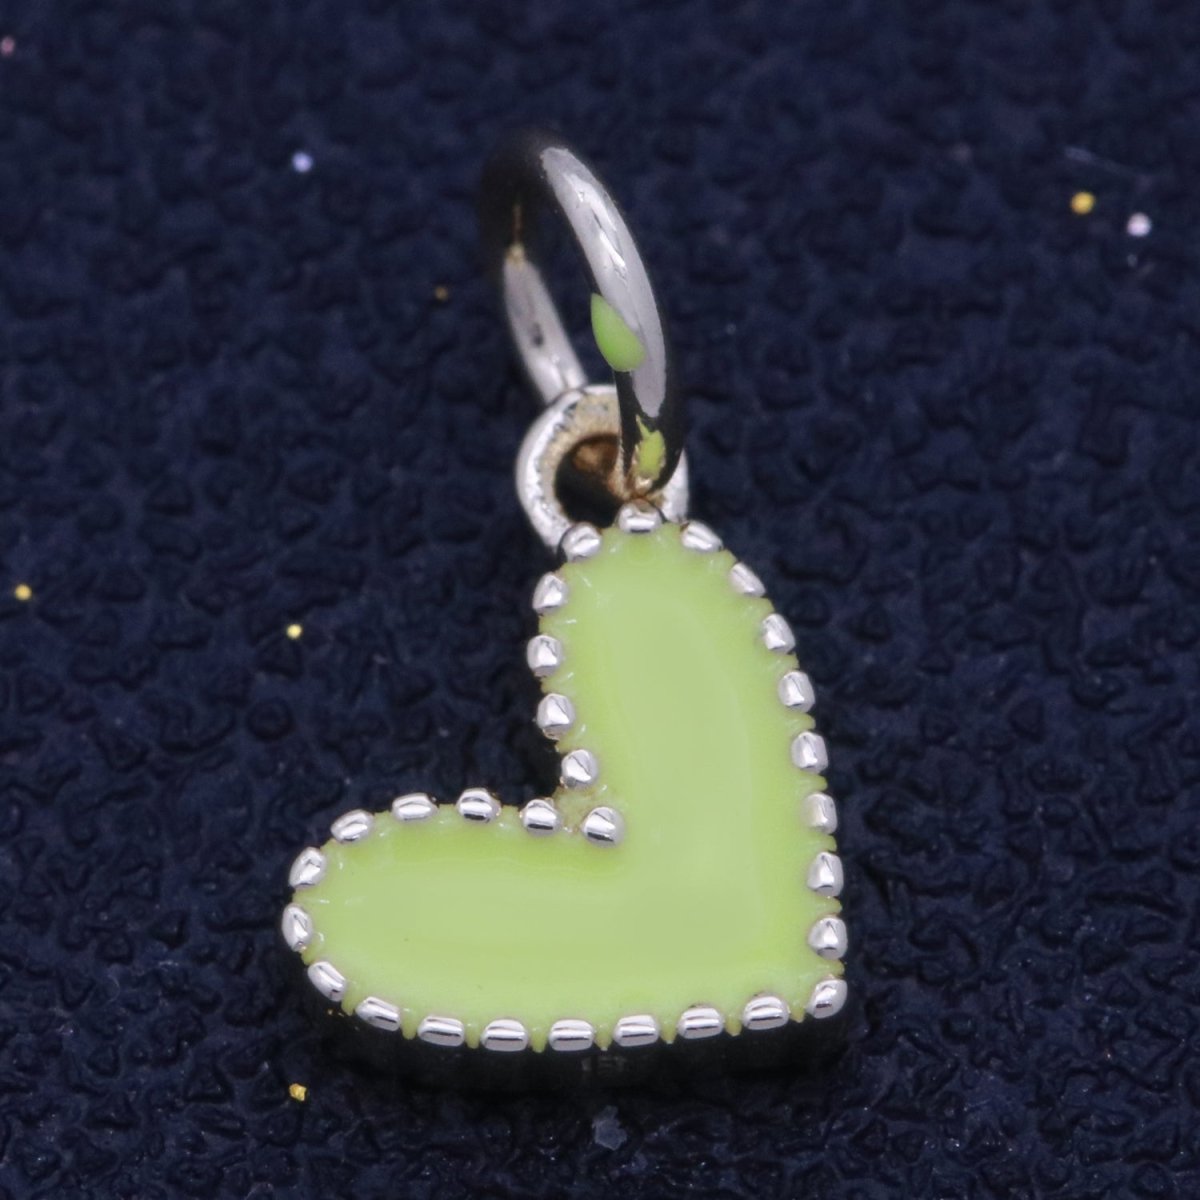 Small Gold Heart Charm - Dainty Enamel Mini Heart Add On Charm Tiny Colorful Heart Love Inspired Gold filled Pendant for Necklace Bracelet M-637 M-638 M-640to M-647 - DLUXCA